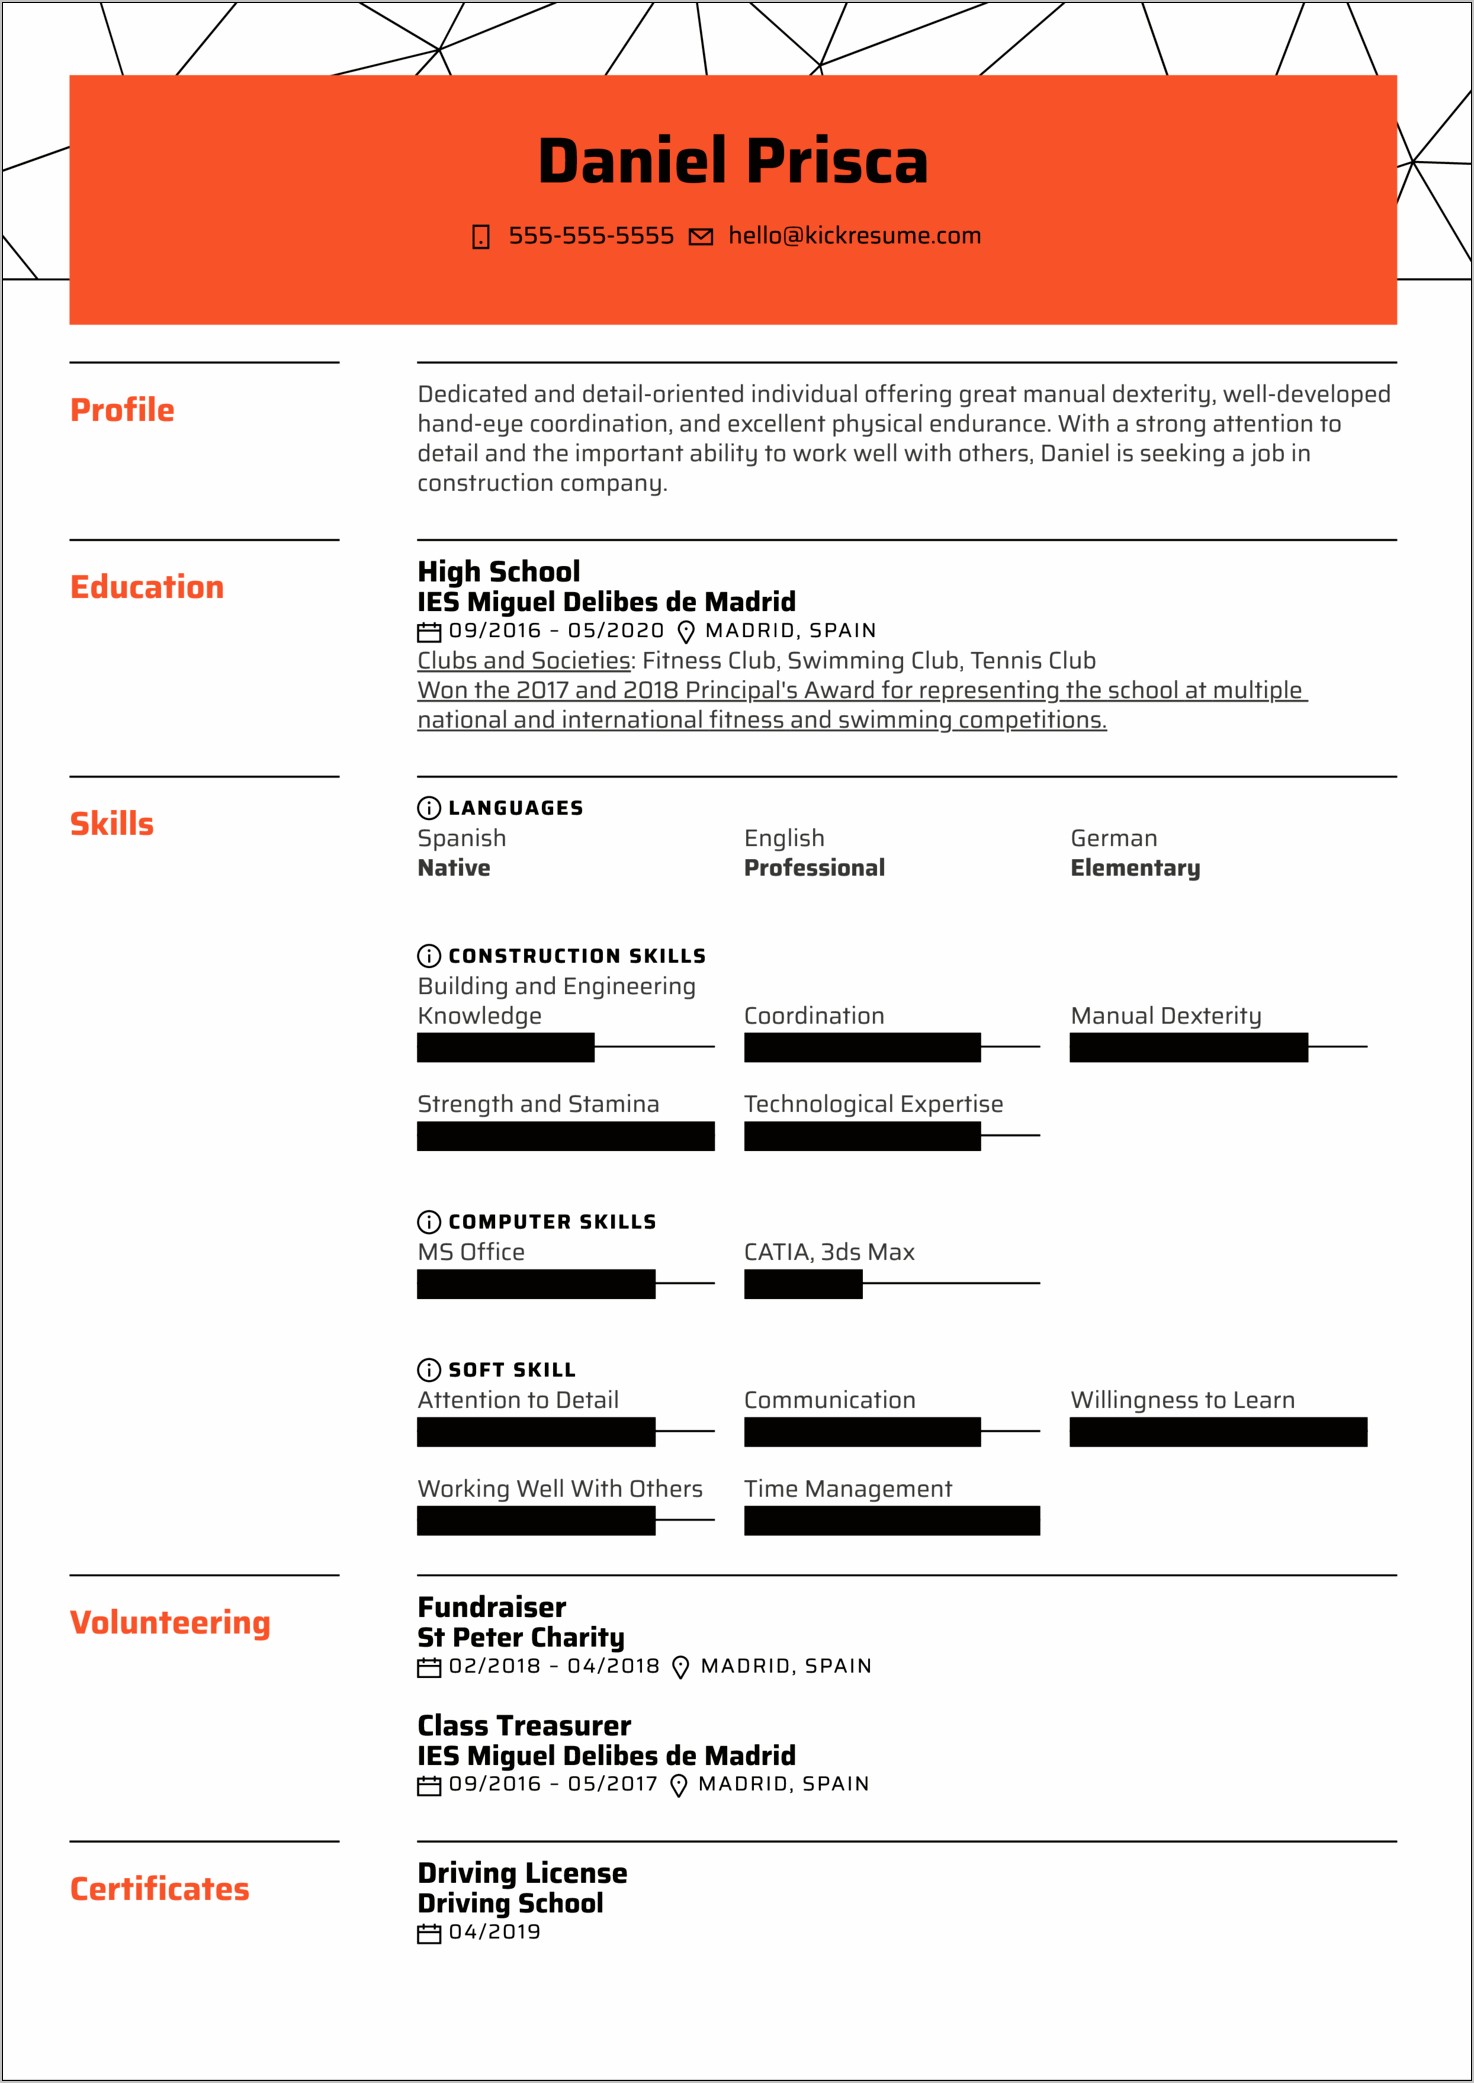 Resume For People With No Job Experince